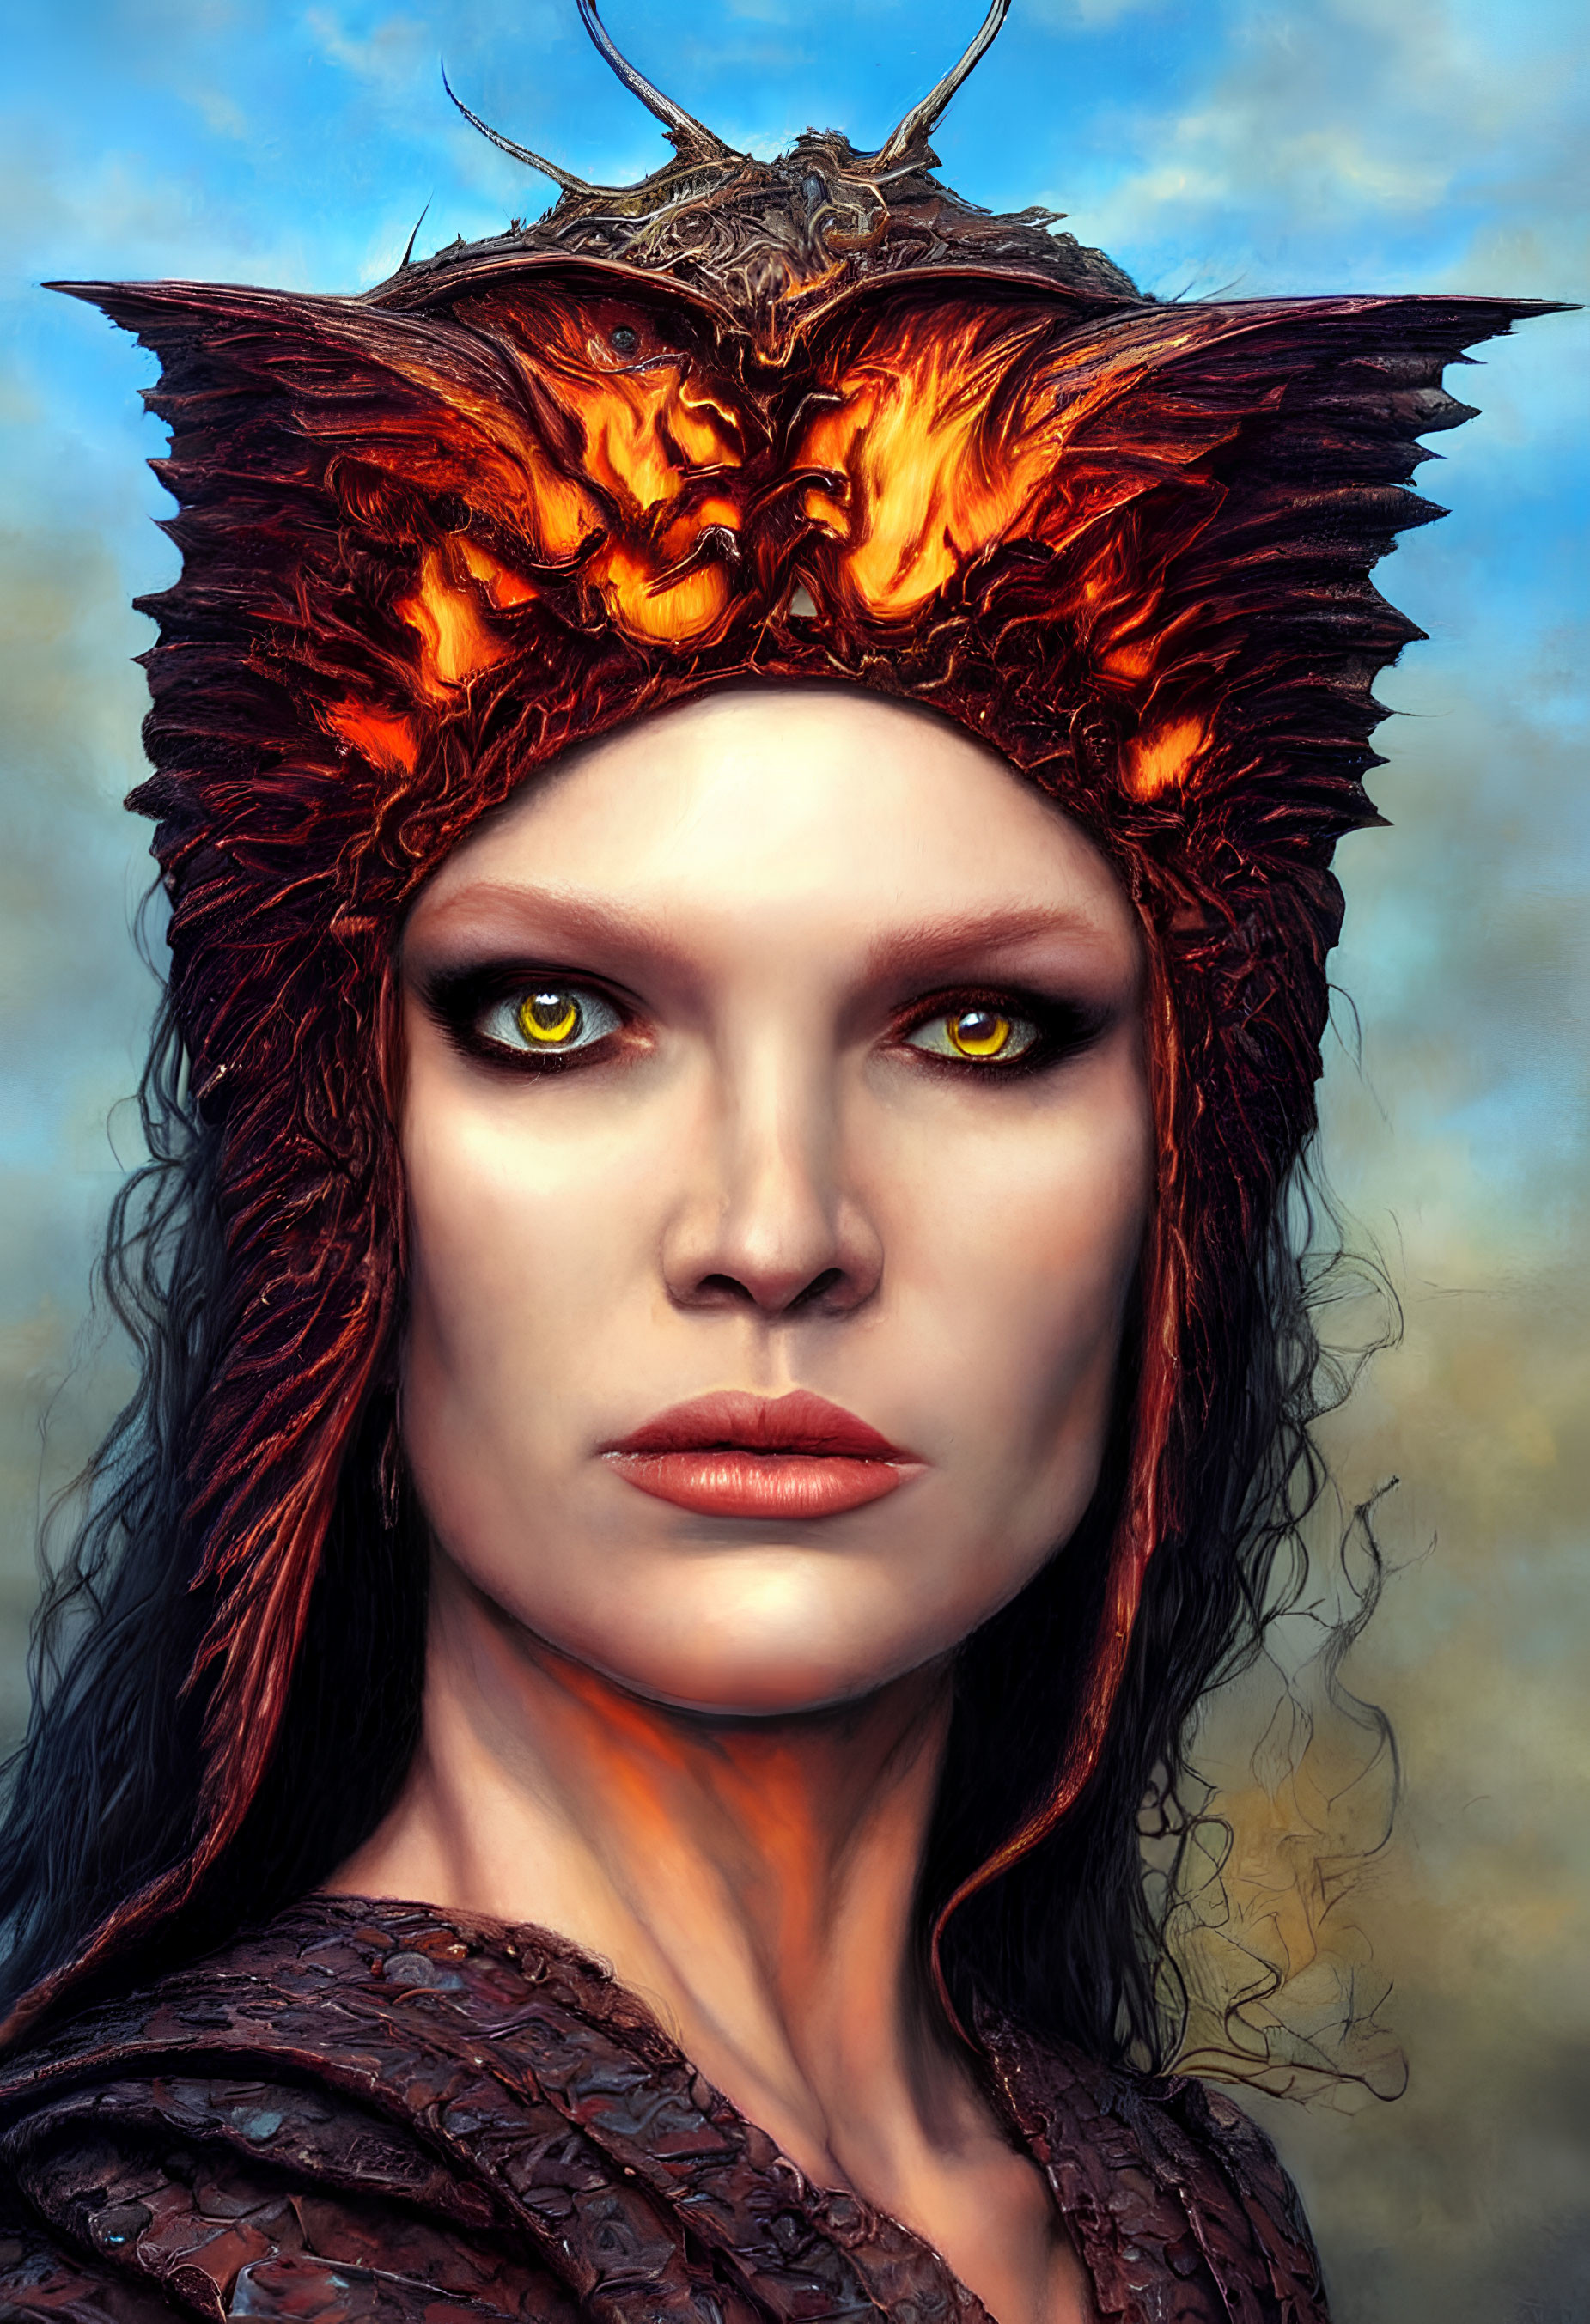 Portrait of Woman with Yellow Eyes and Dragon Headdress